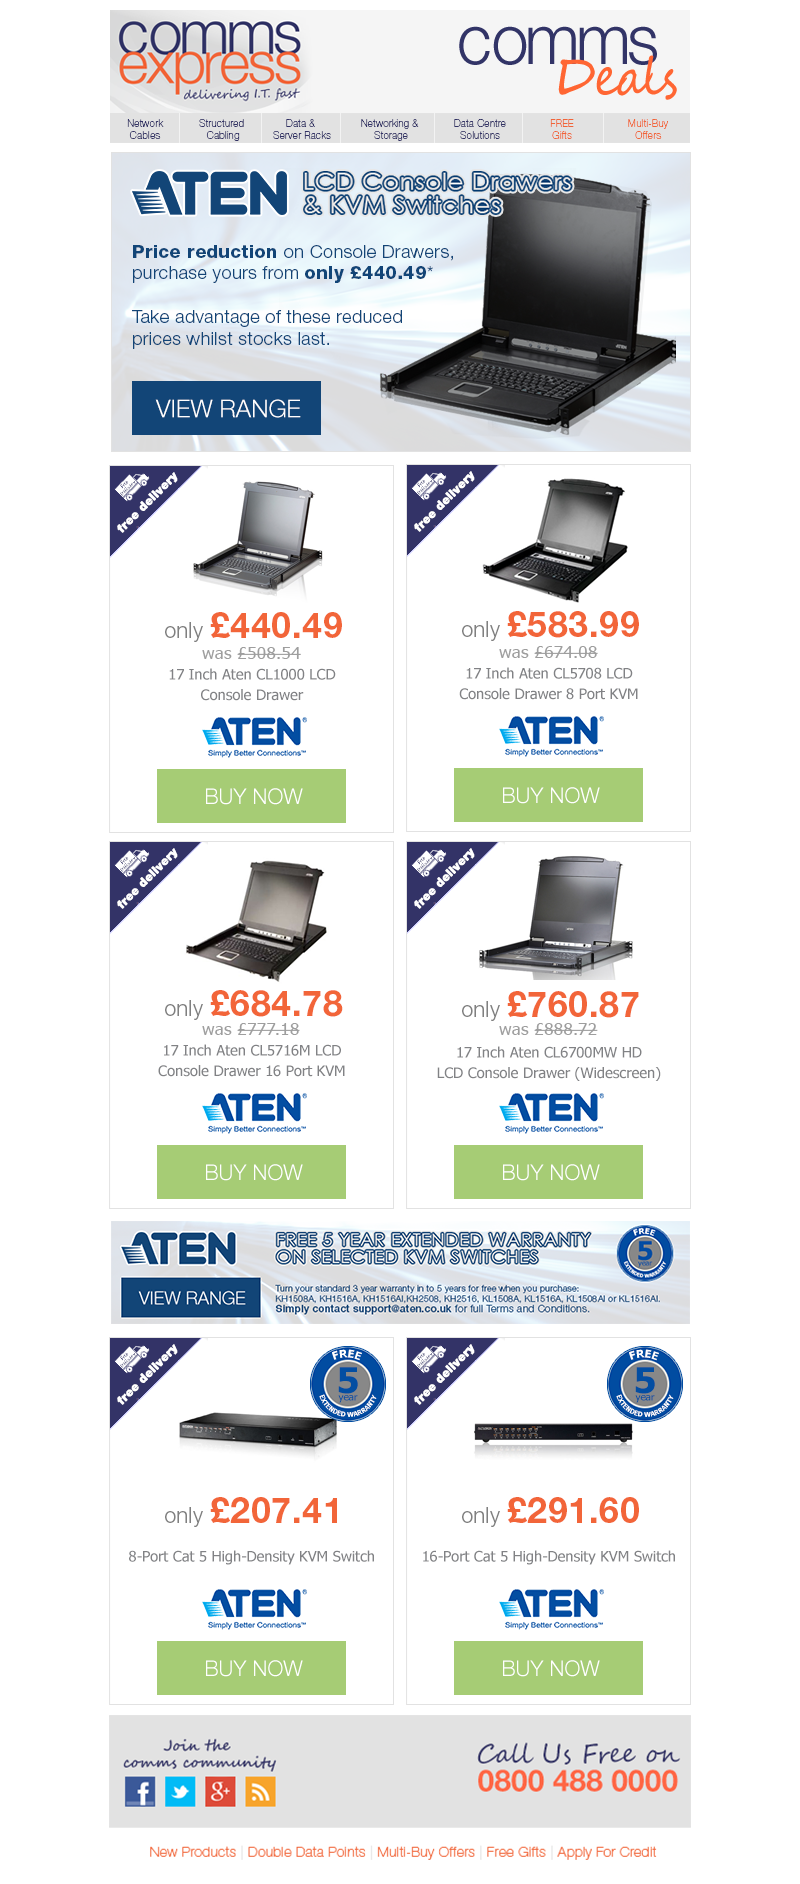 Price reduction on ATEN Console Drawers 